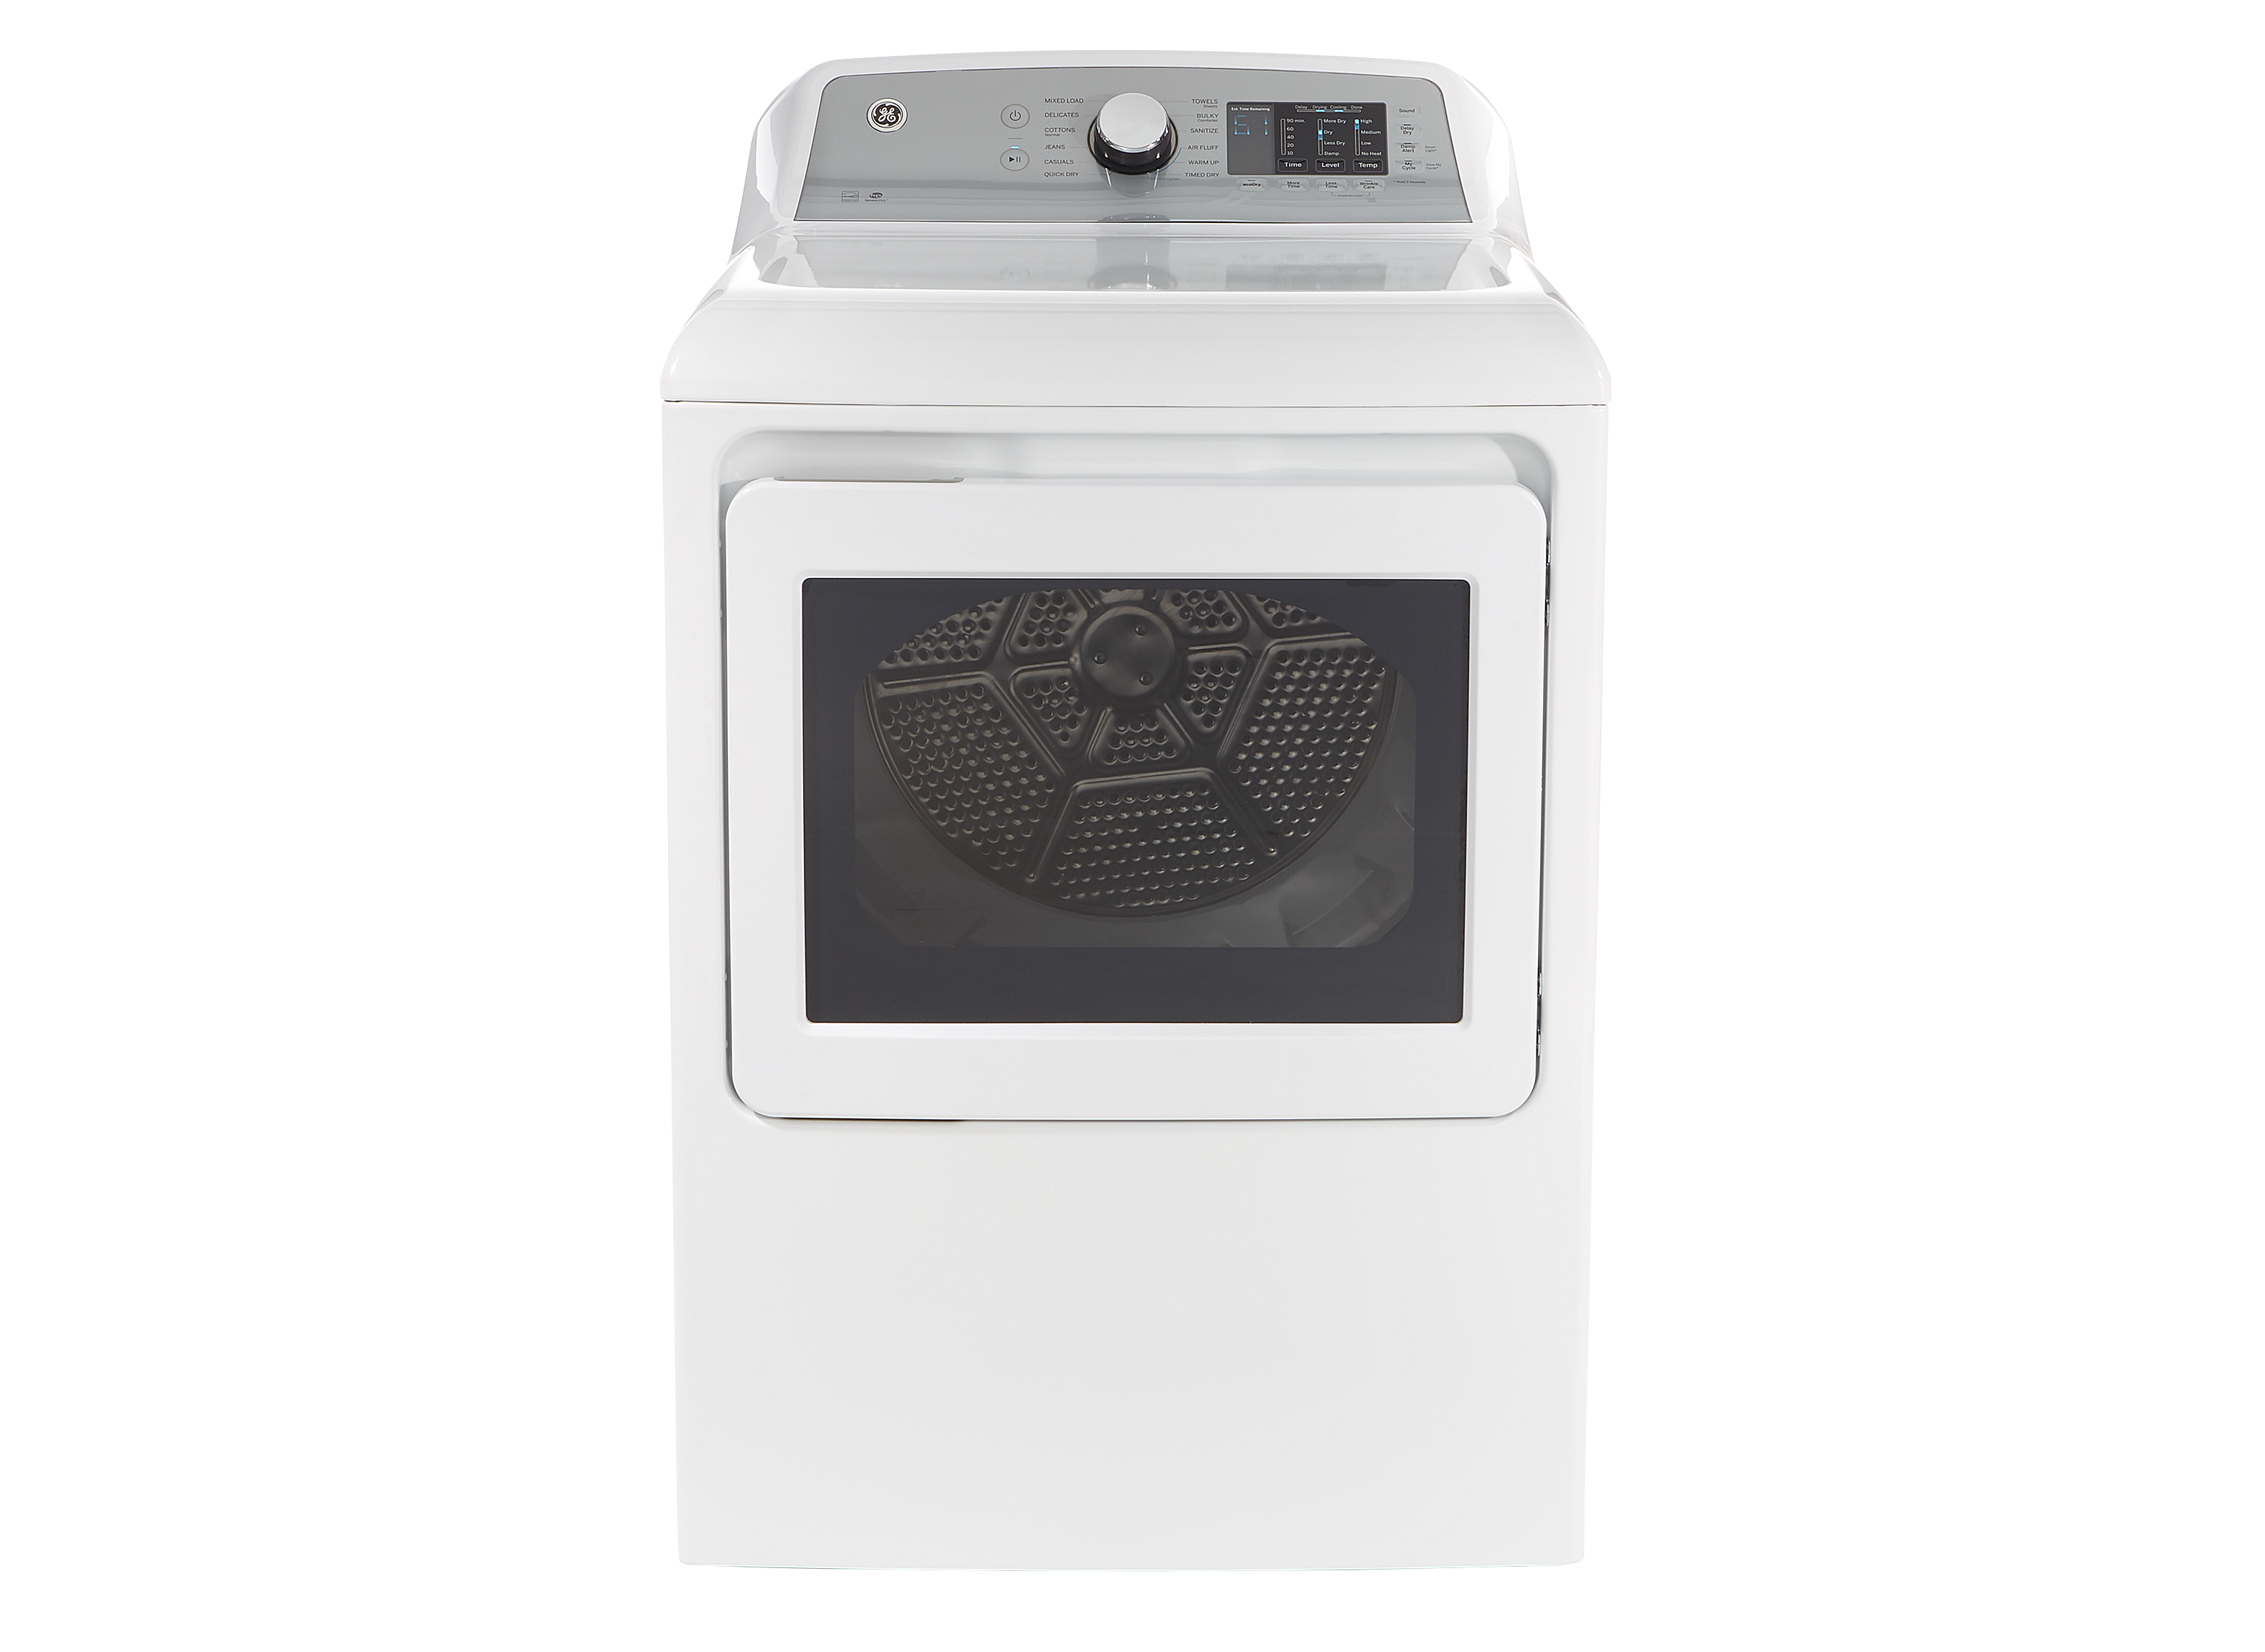 Black GE Top Load Laundry Pair with GTW720BSNWS 27 Washer and GTD72EBSNWS 27 Electric Dryer in White 